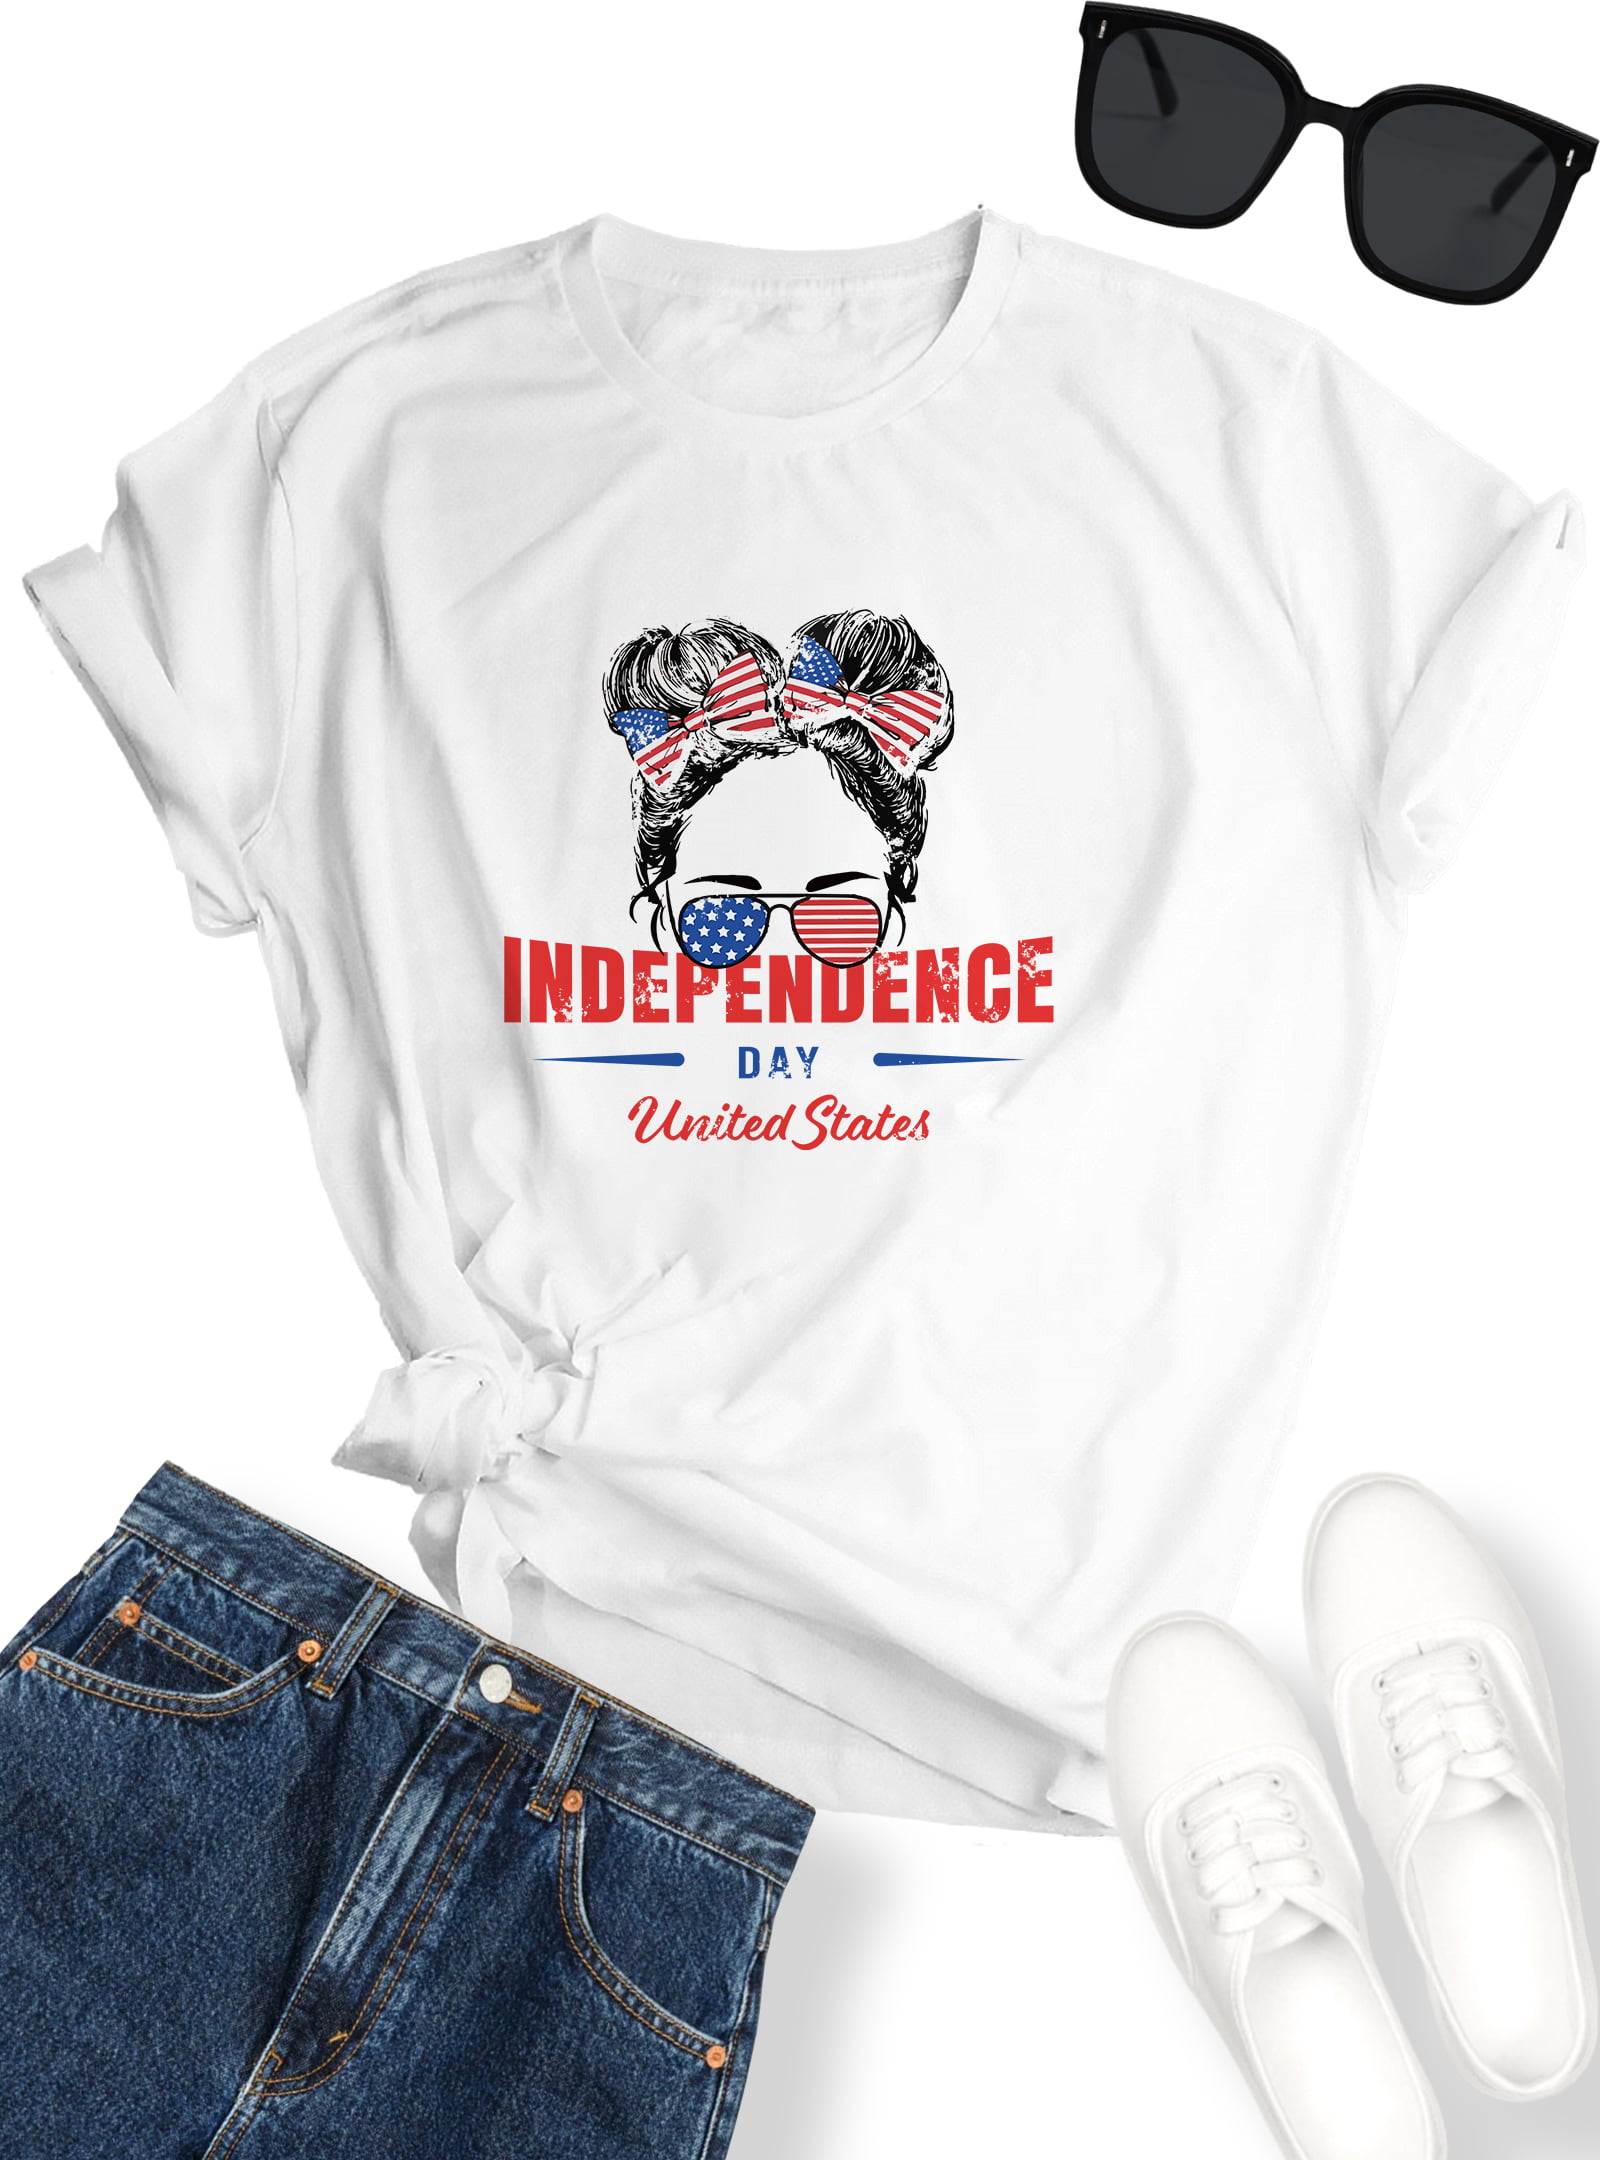  CHUOAND Independence Day Shirt Women Graphic,hot Deals